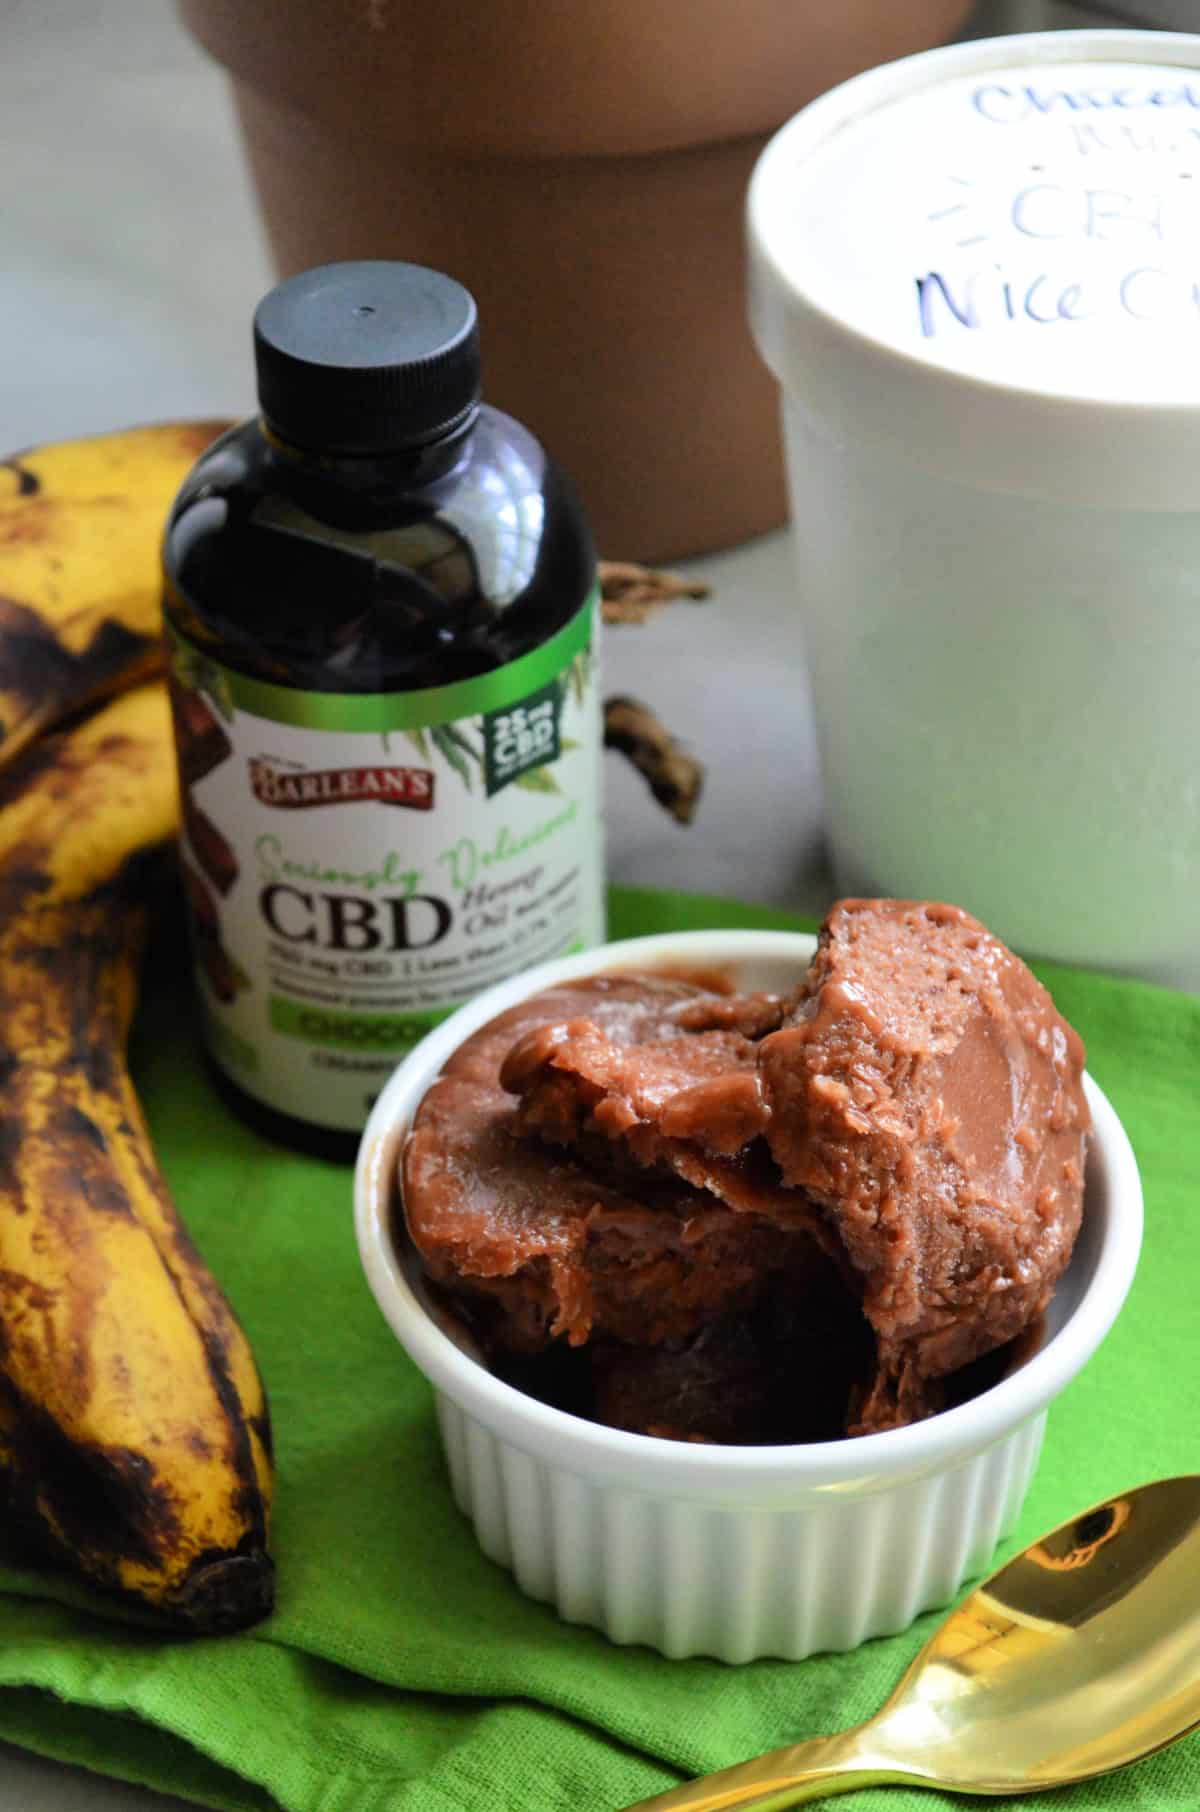 Small bowl of chocolate ice cream in front of CBD oil bottle, bananas, and pint.